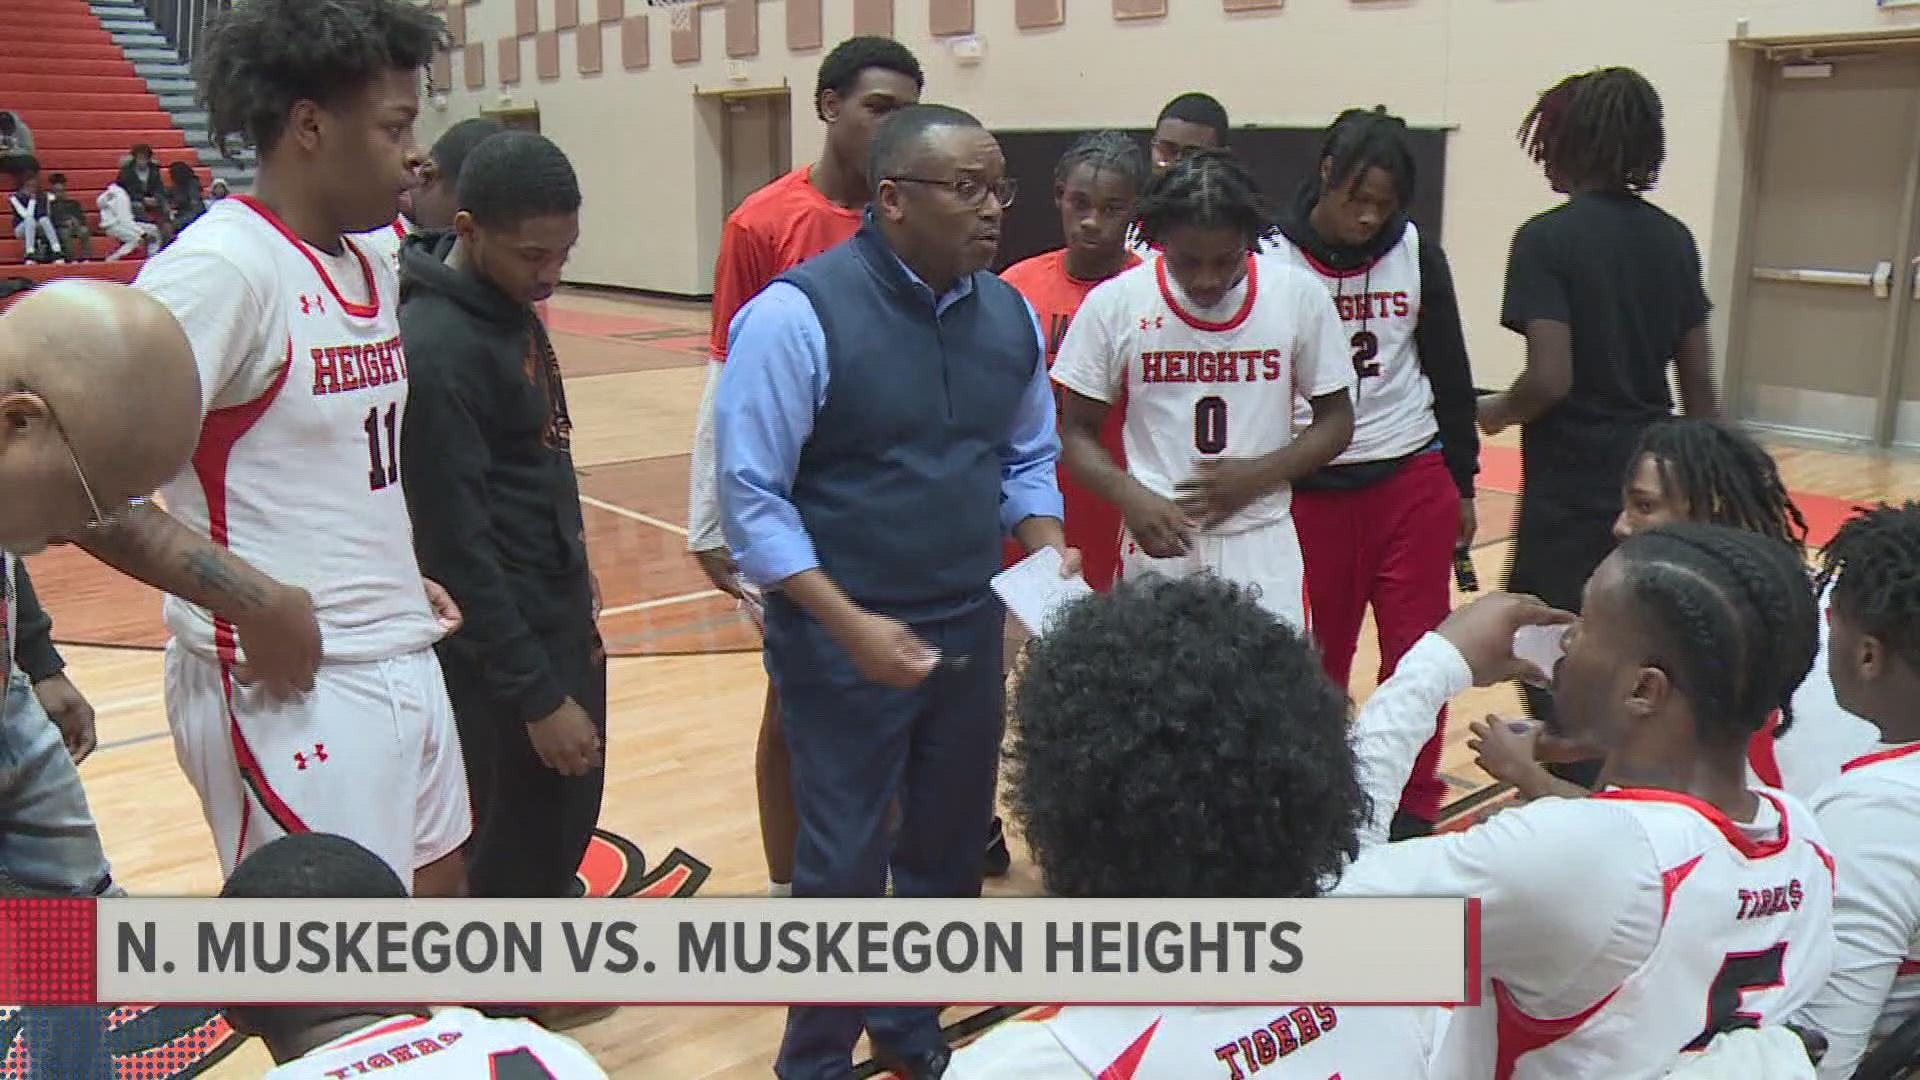 North Muskegon squeaks by Muskegon Heights 57-54.